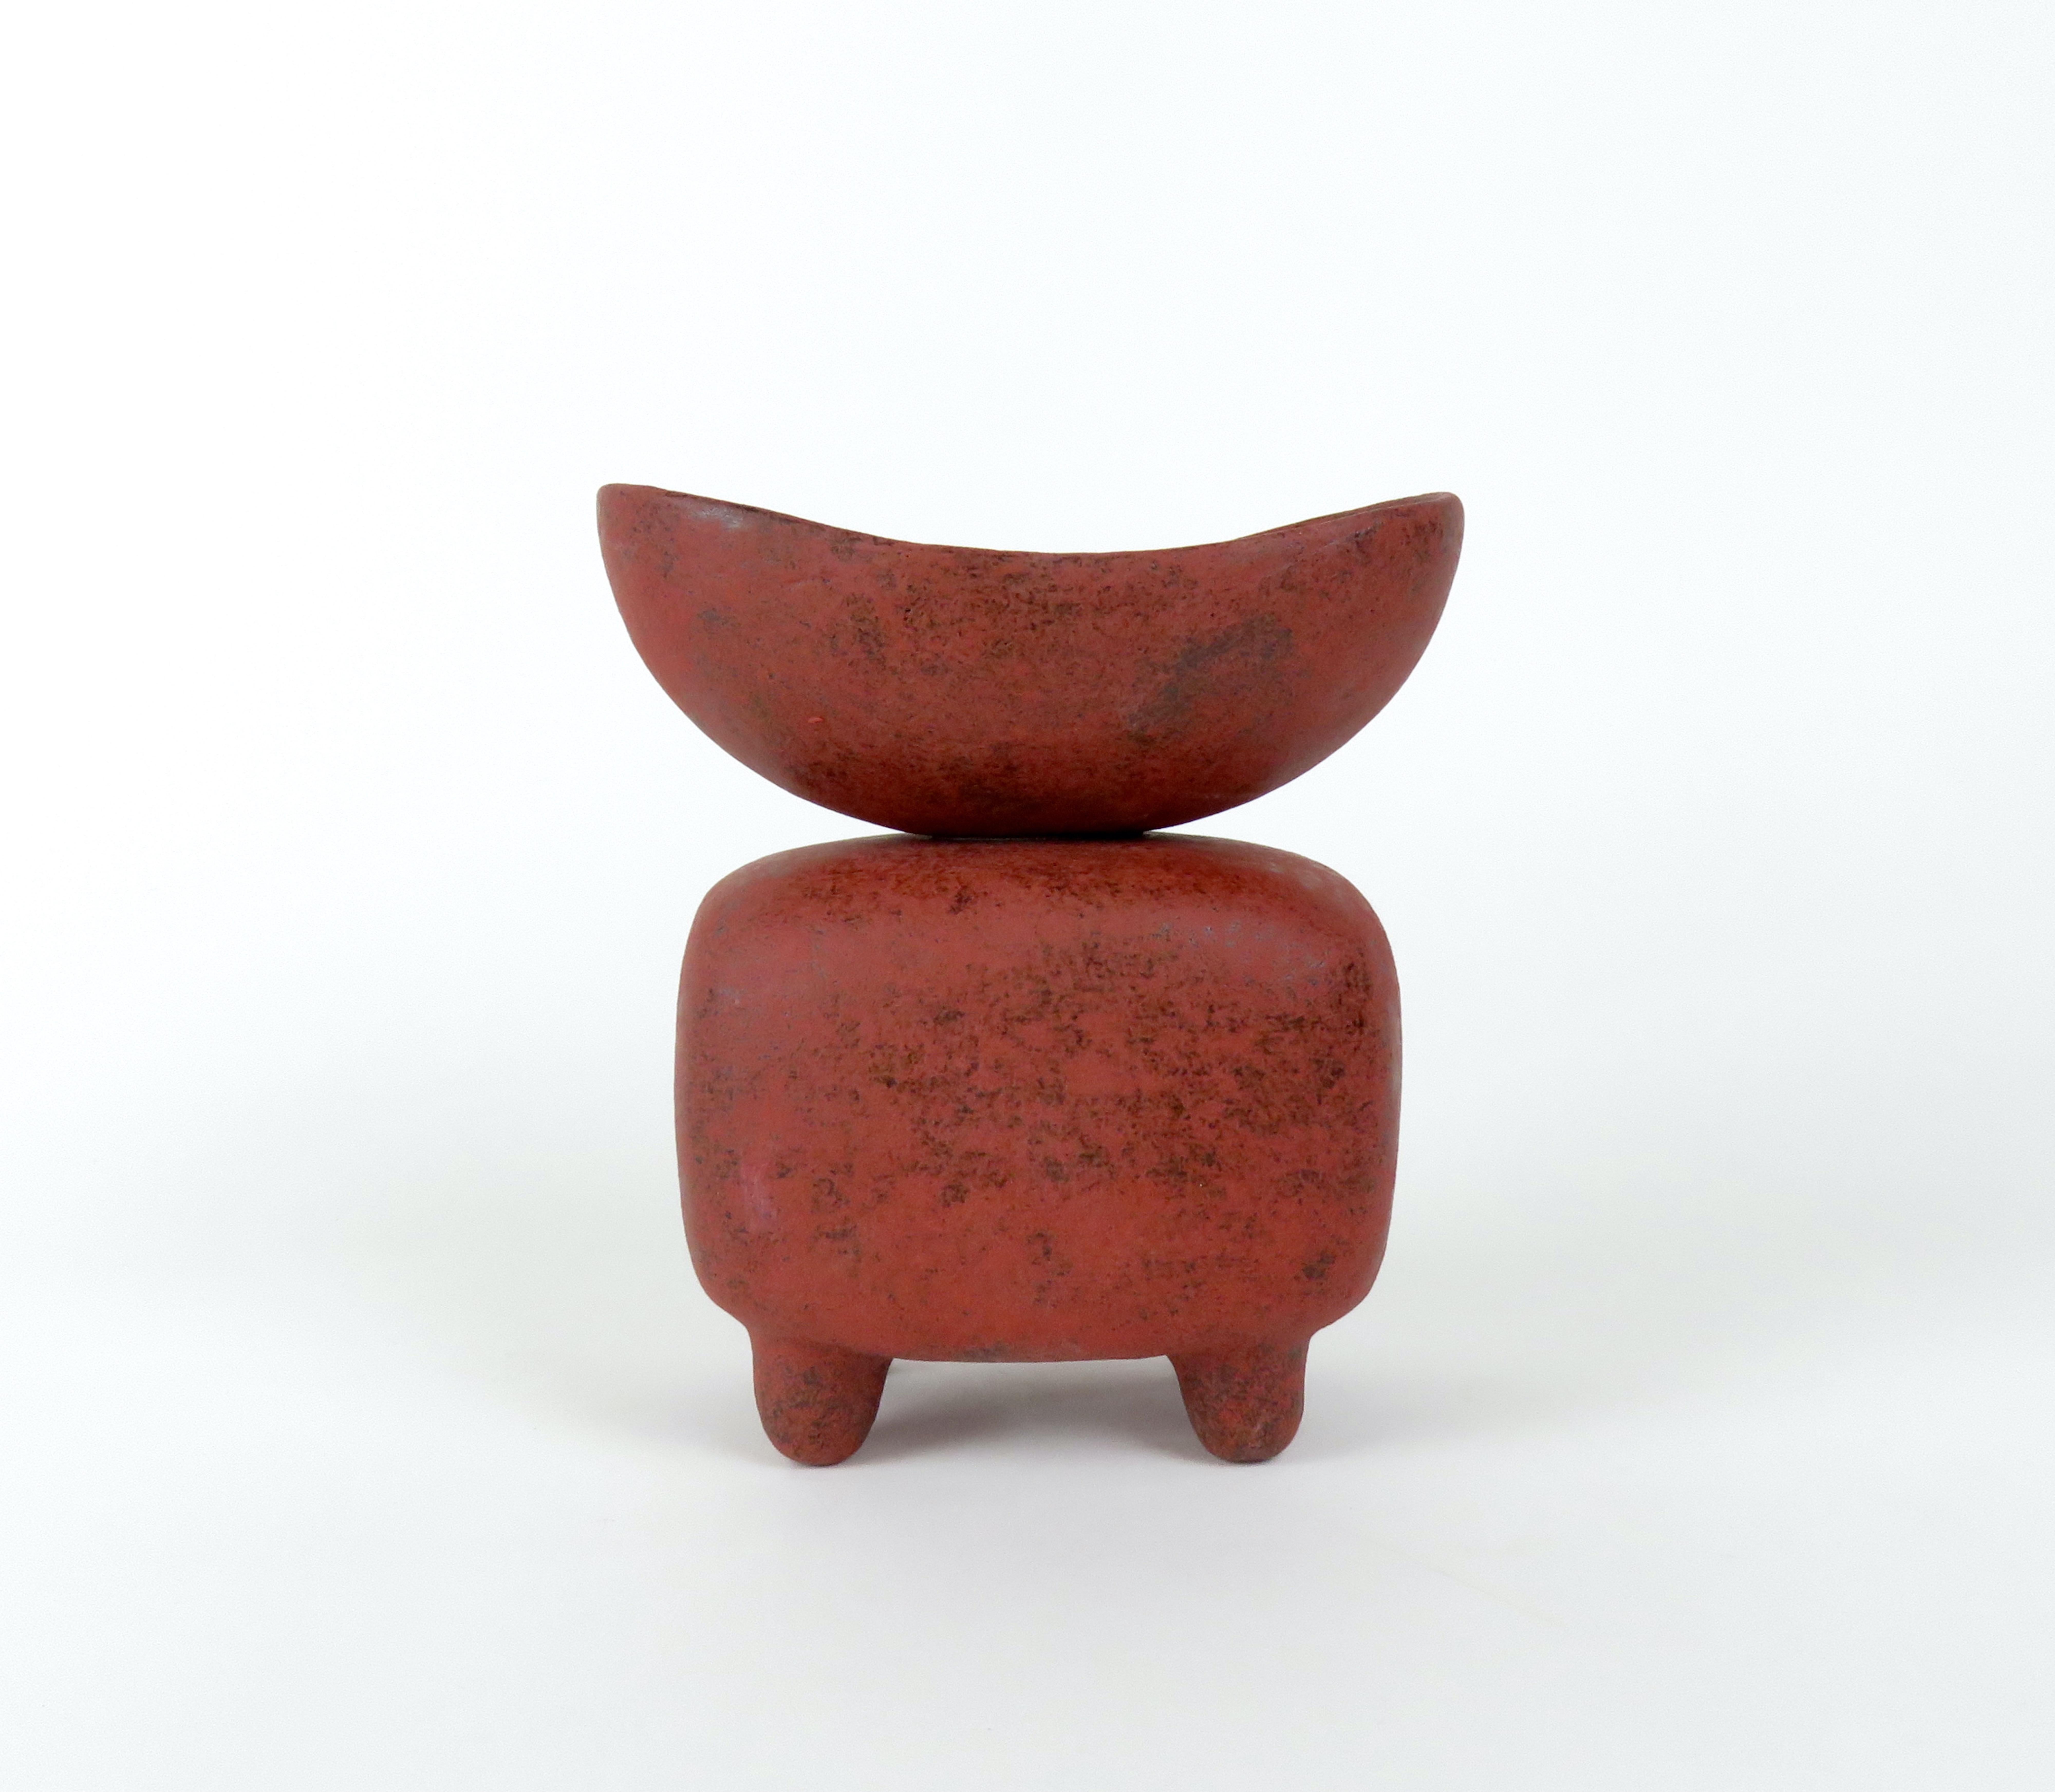 Hand-Crafted Mottled Red Ceramic Sculpture, Wide Oval Cup on Rounded Cube, Hand Built 